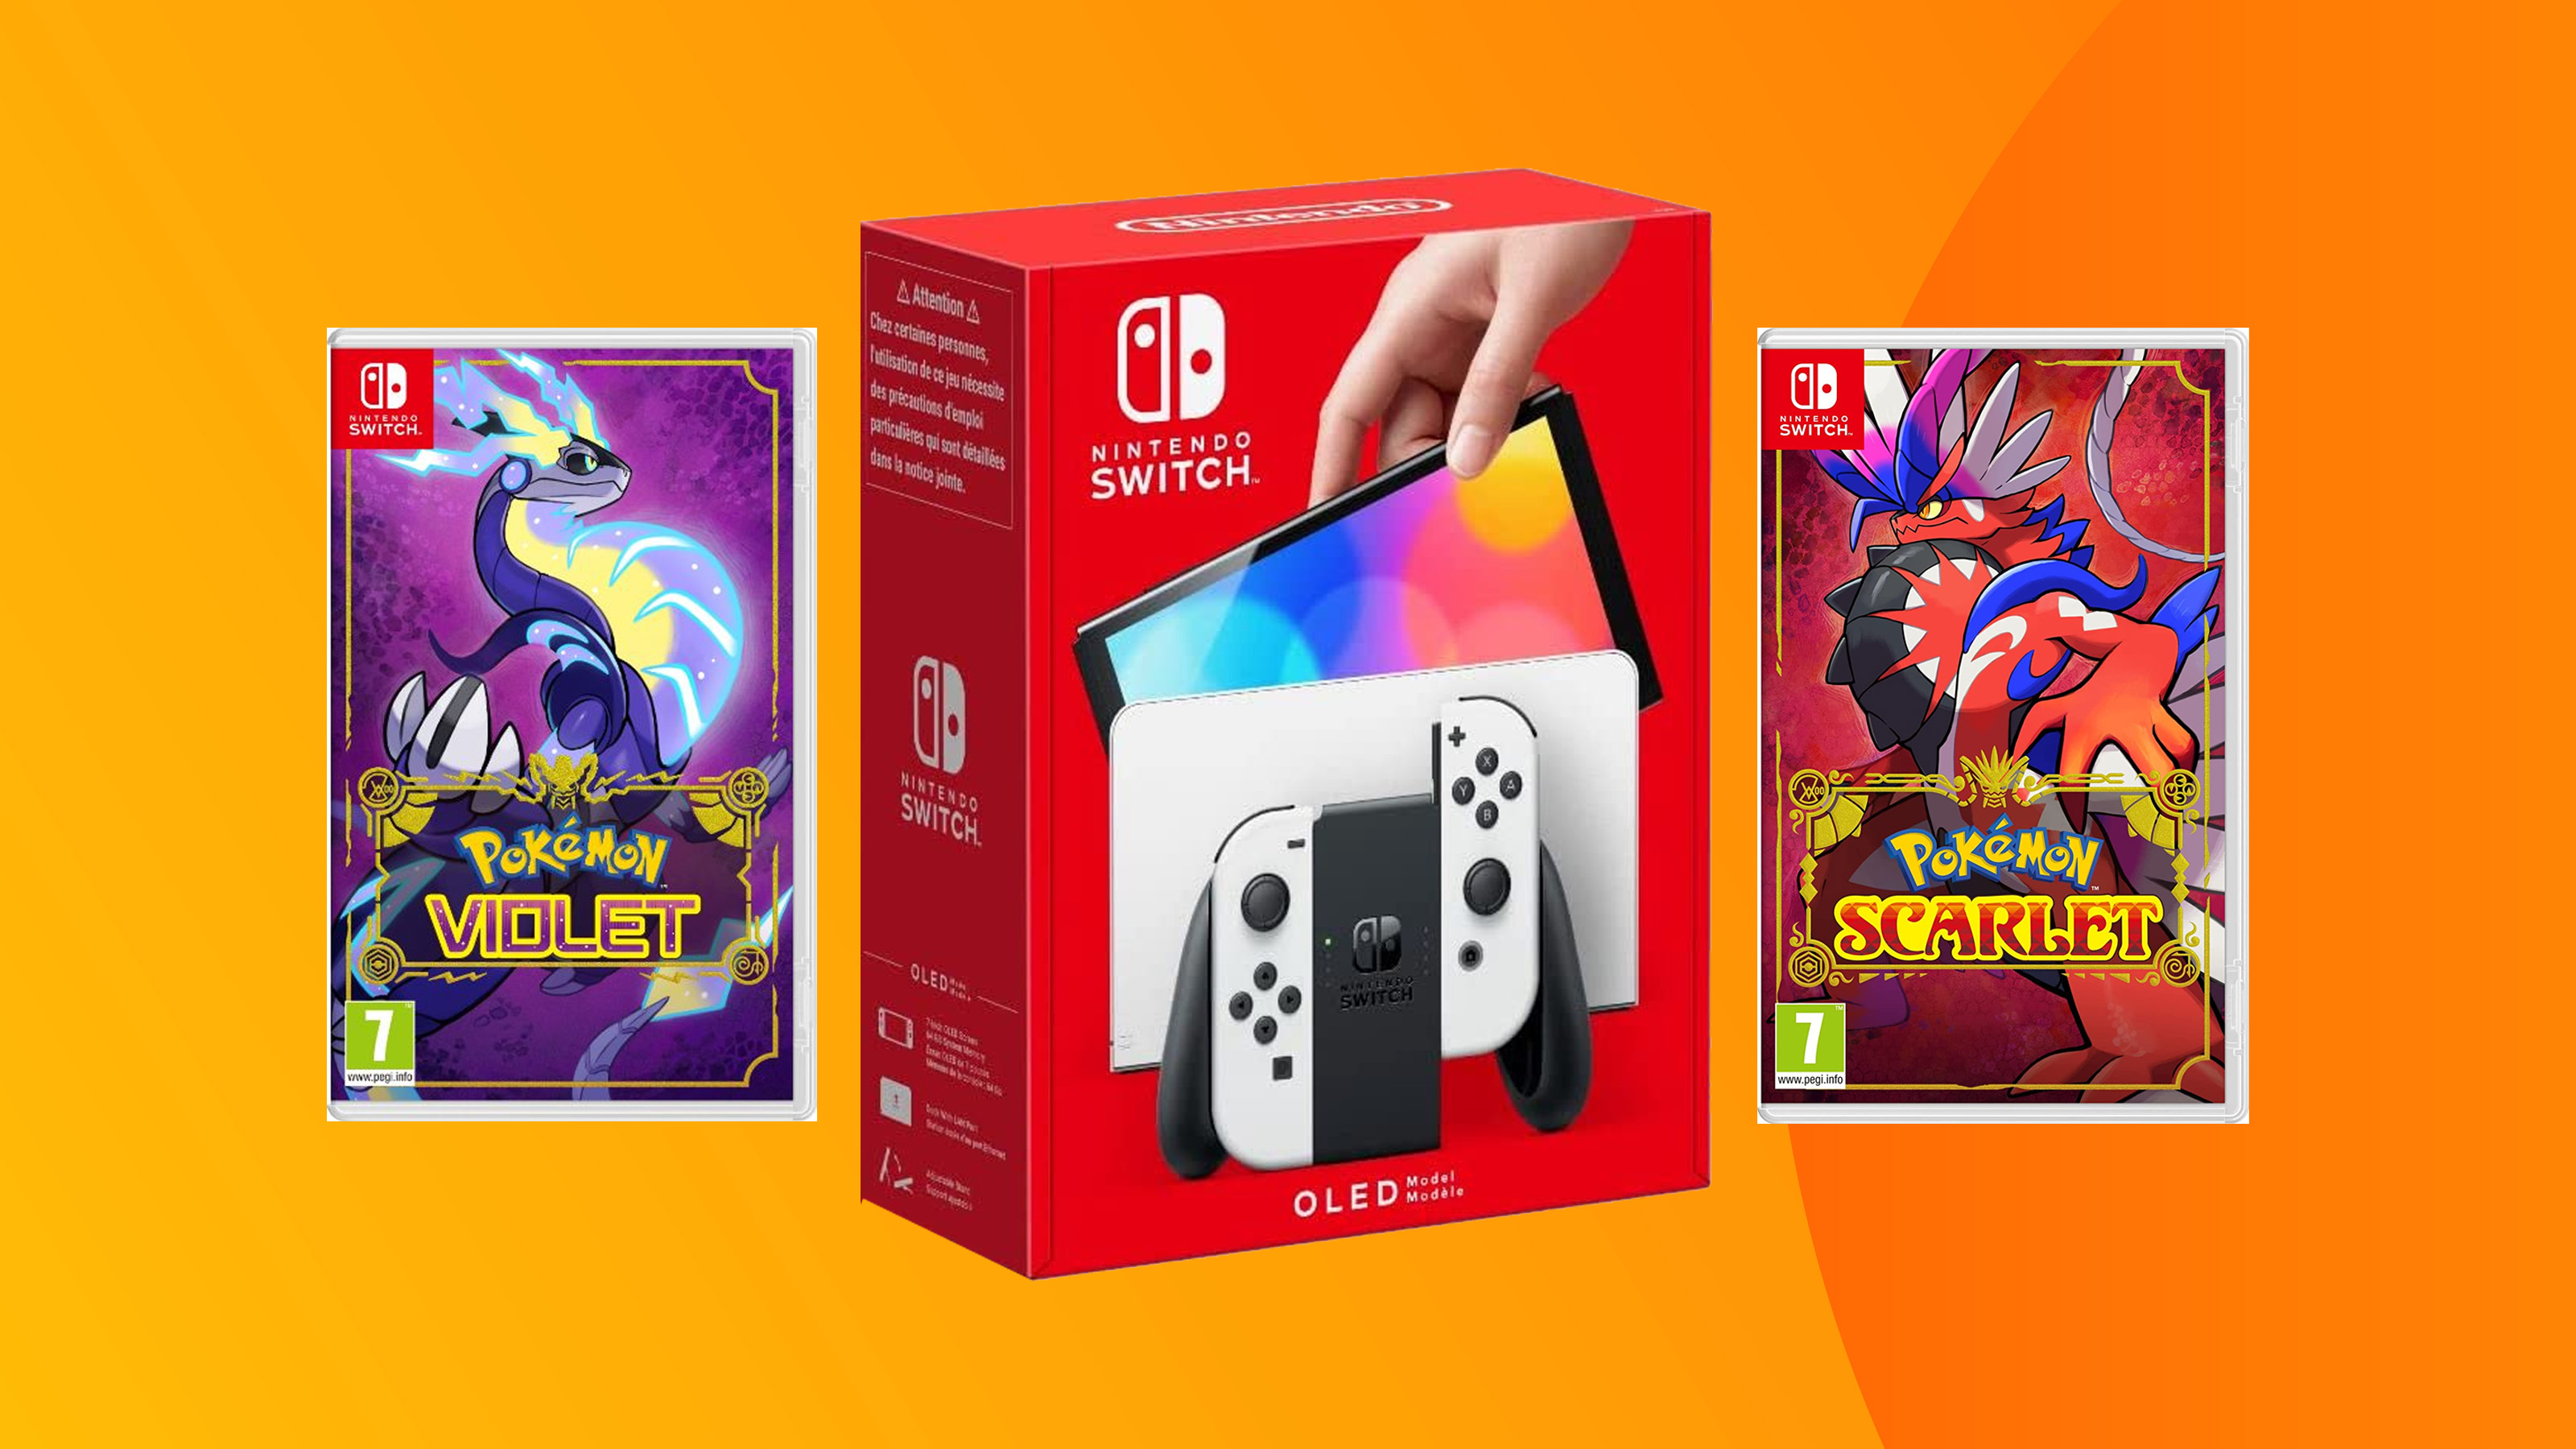 A product shot of the Switch OLED console and Pokemon games on a colorful background